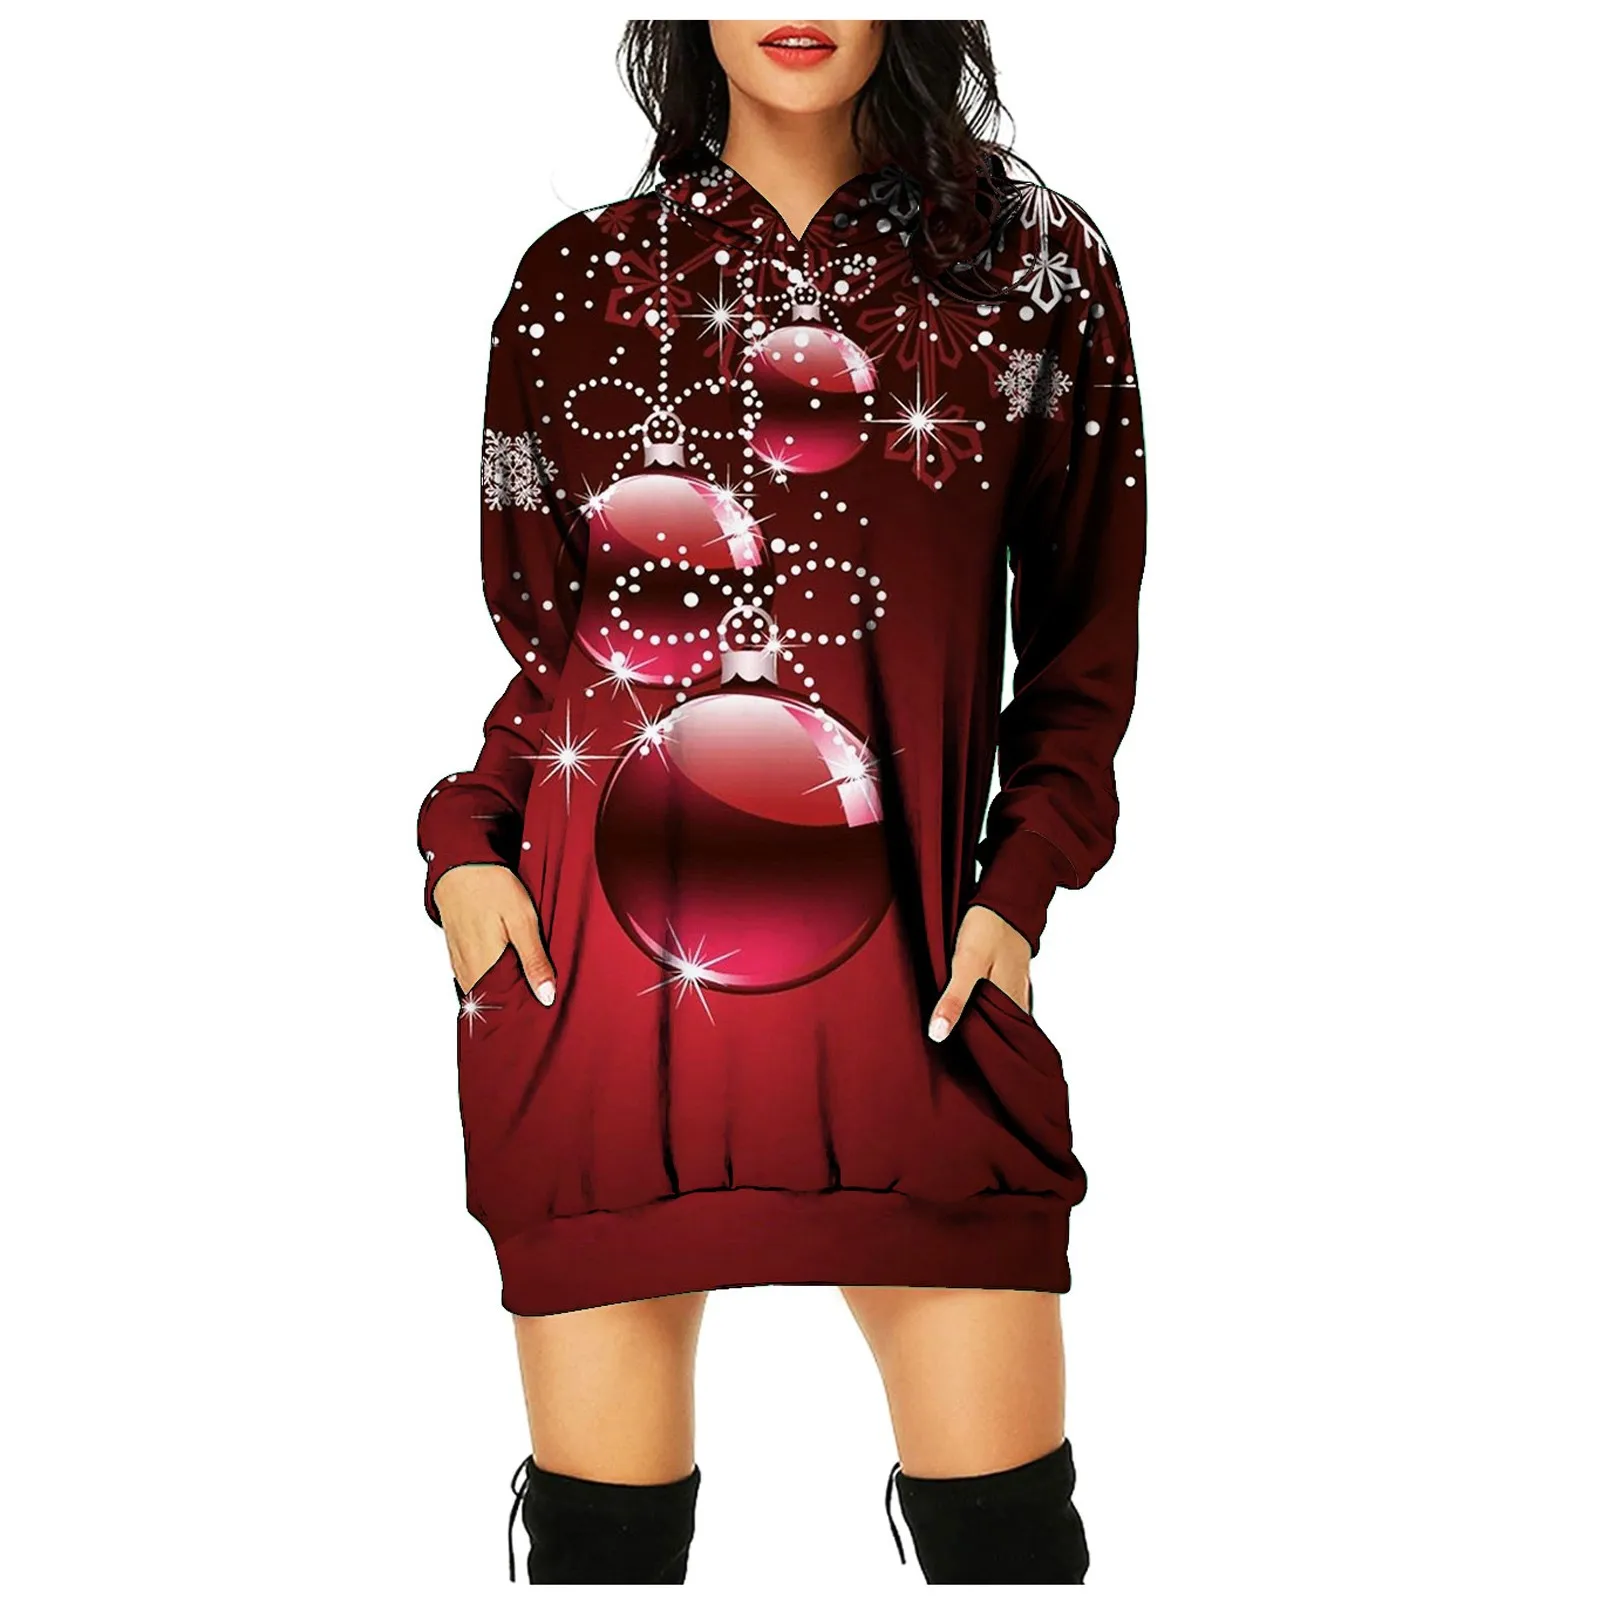 

Vintage Hoodie Women Pullover Women Witch Halloween Fashion Hooded Long Sleeve Mid Length Pockets Tops Aesthetic Sudadera Mujer